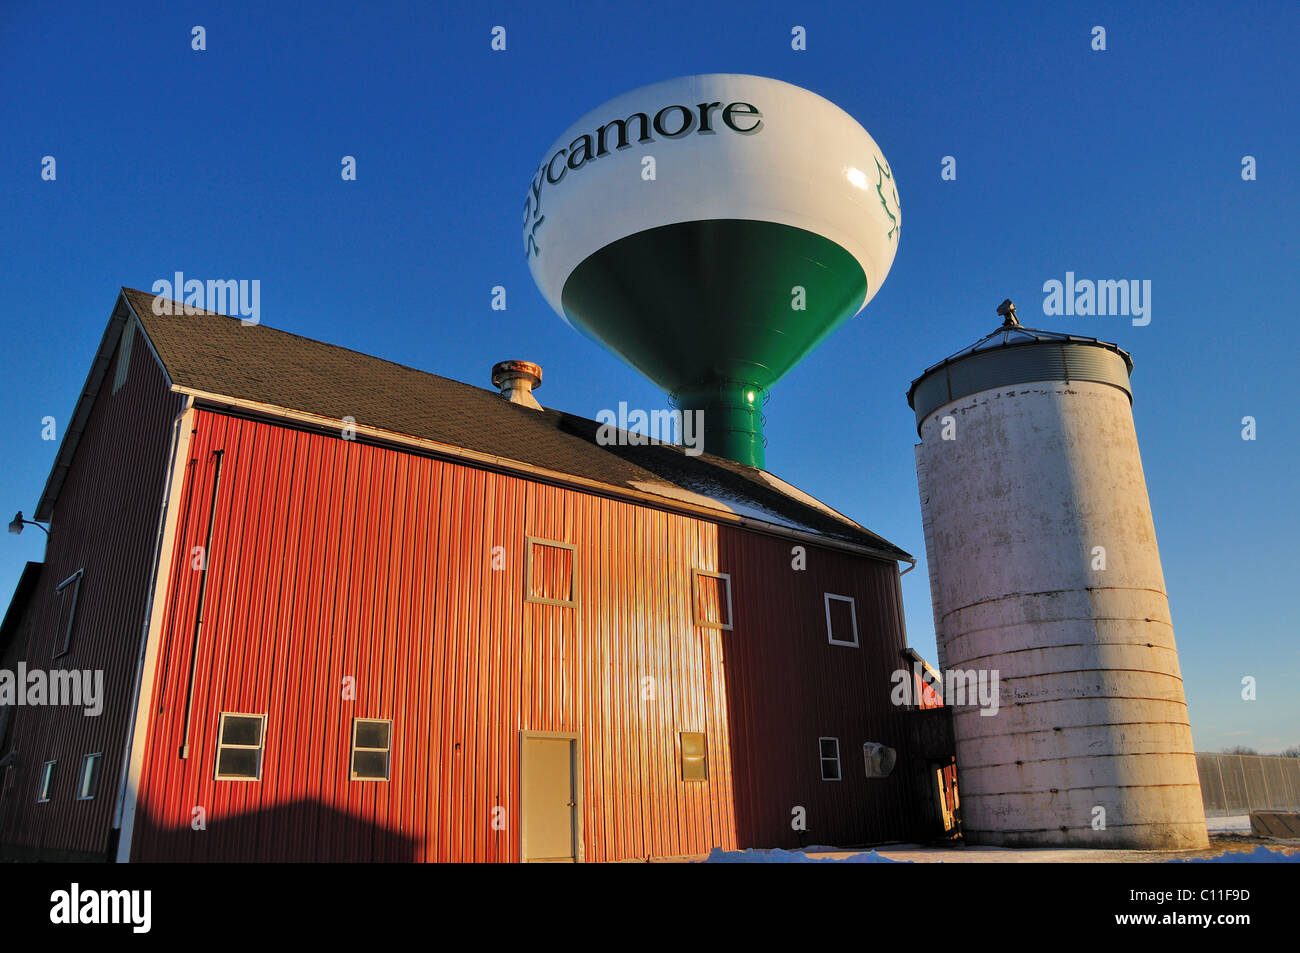 A red barn and silo by a water tower Sycamore Illinois, USA. Stock Photo